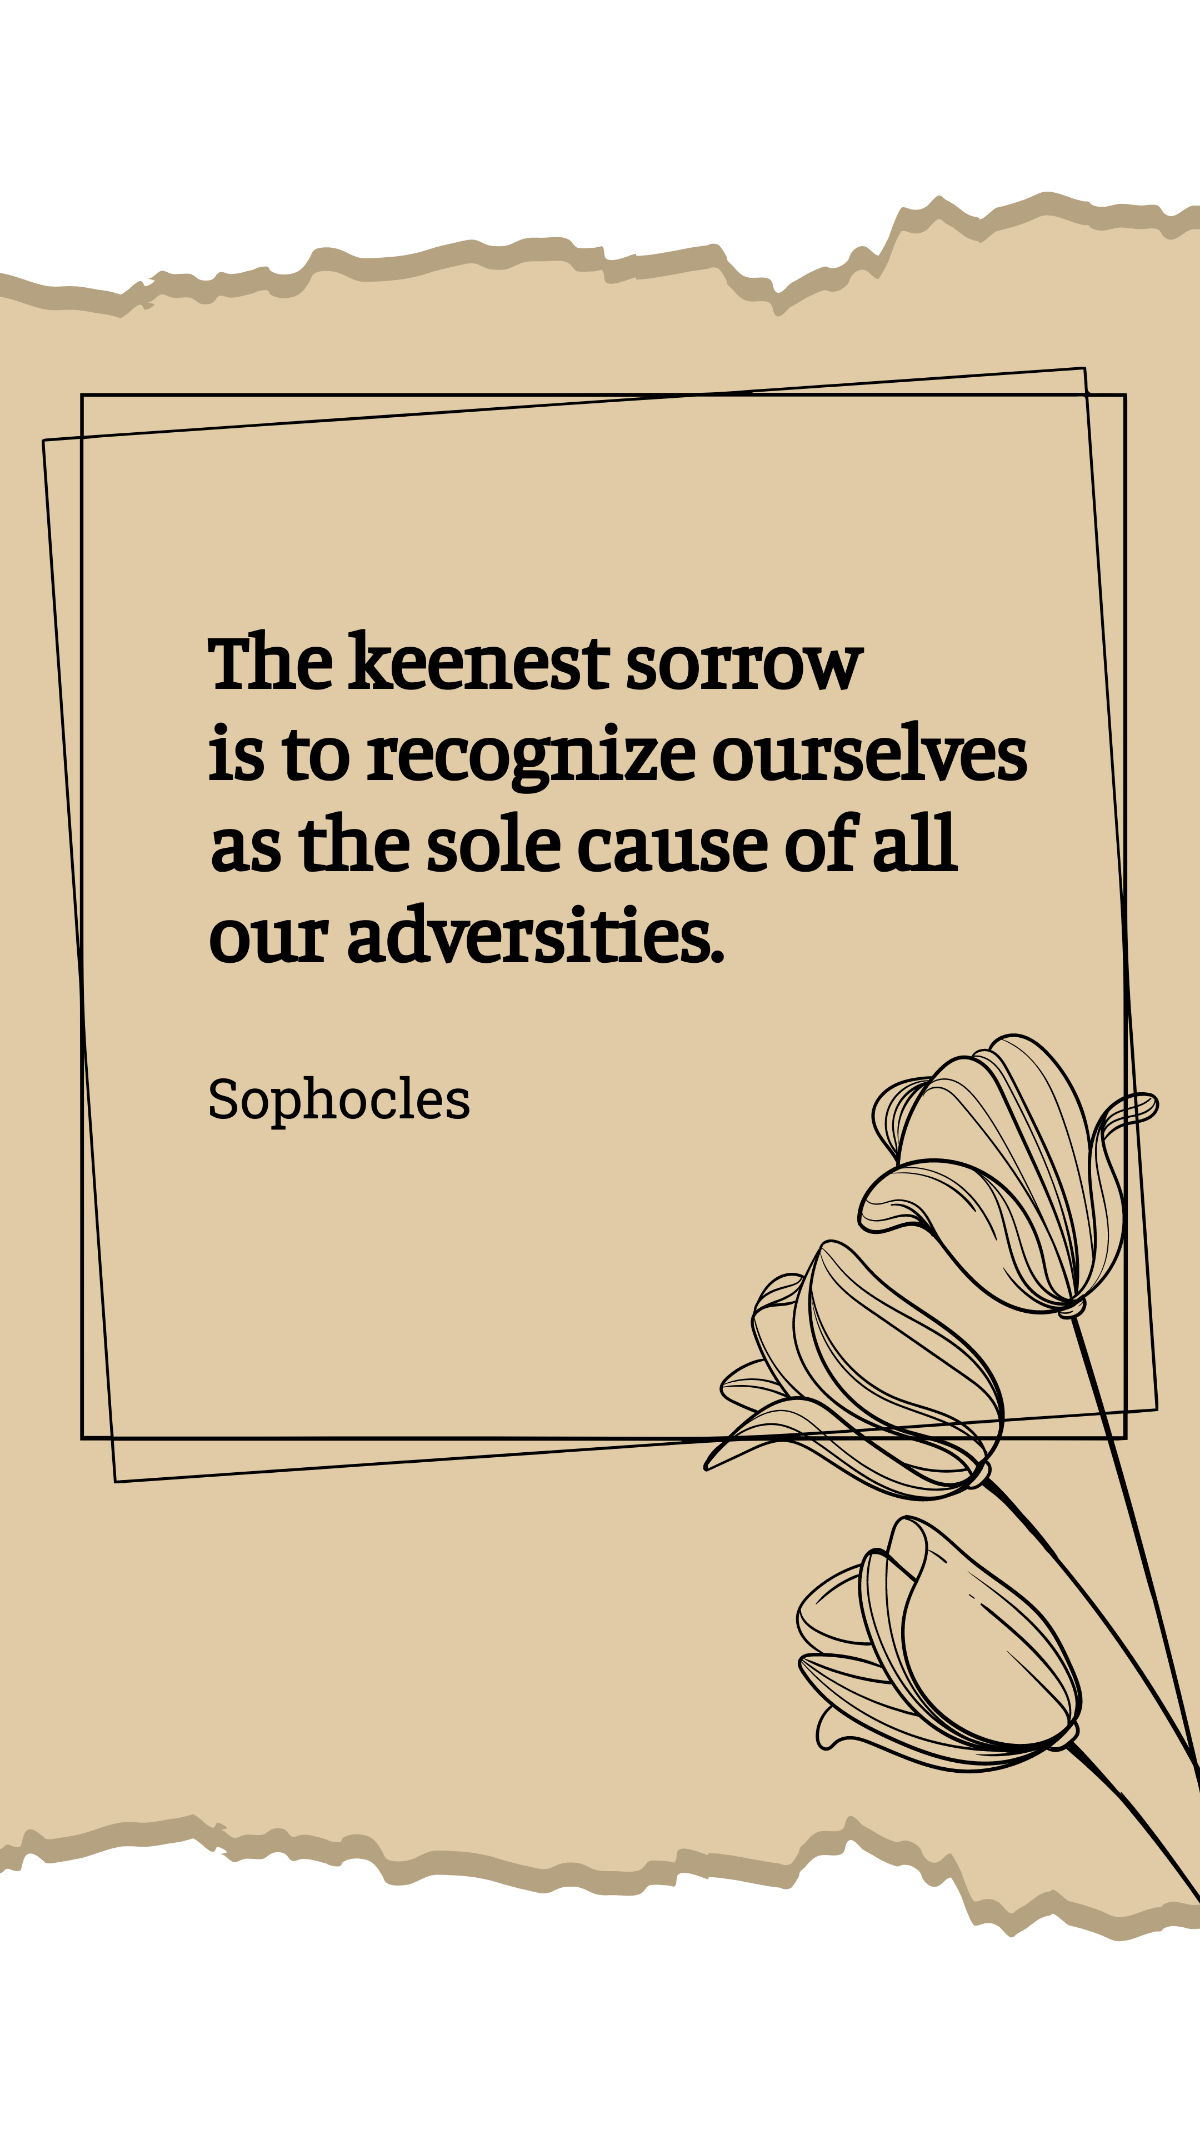 Sophocles - The keenest sorrow is to recognize ourselves as the sole cause of all our adversities. Template